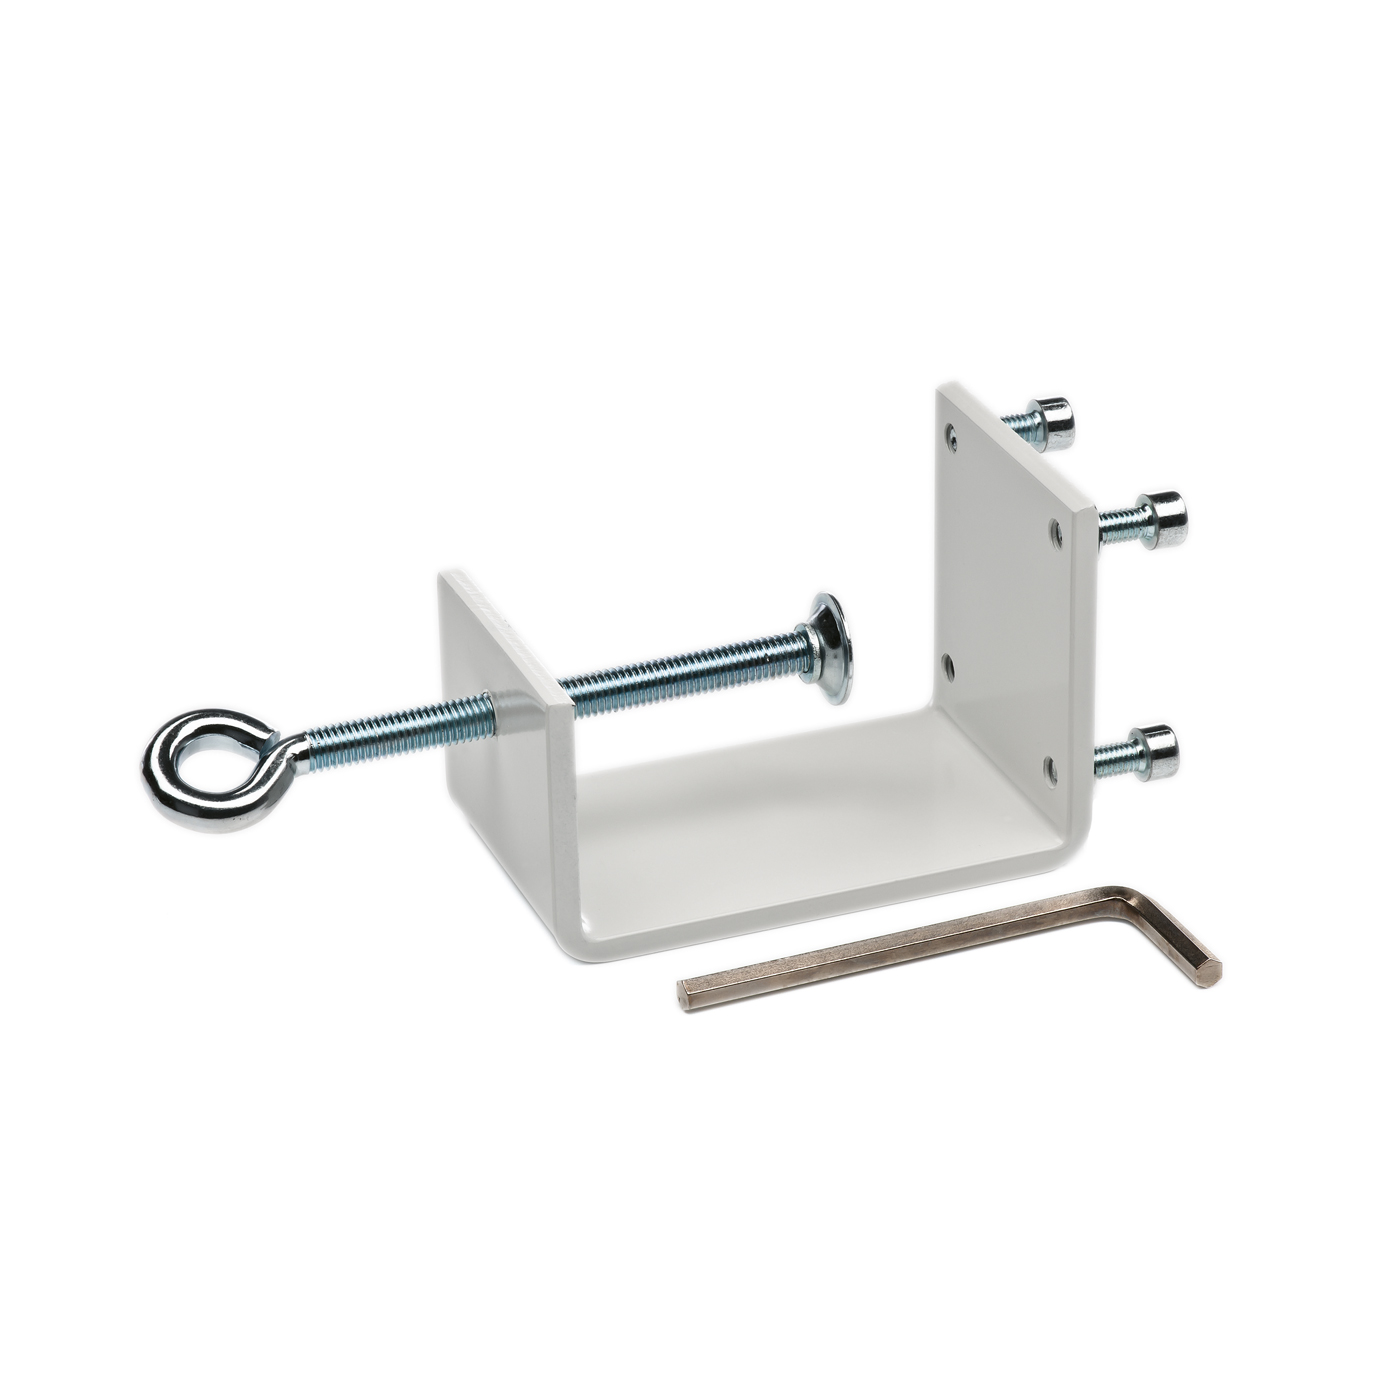 FINO Bench Clamp, Clamping Width approx. 0-85 mm - 1 piece